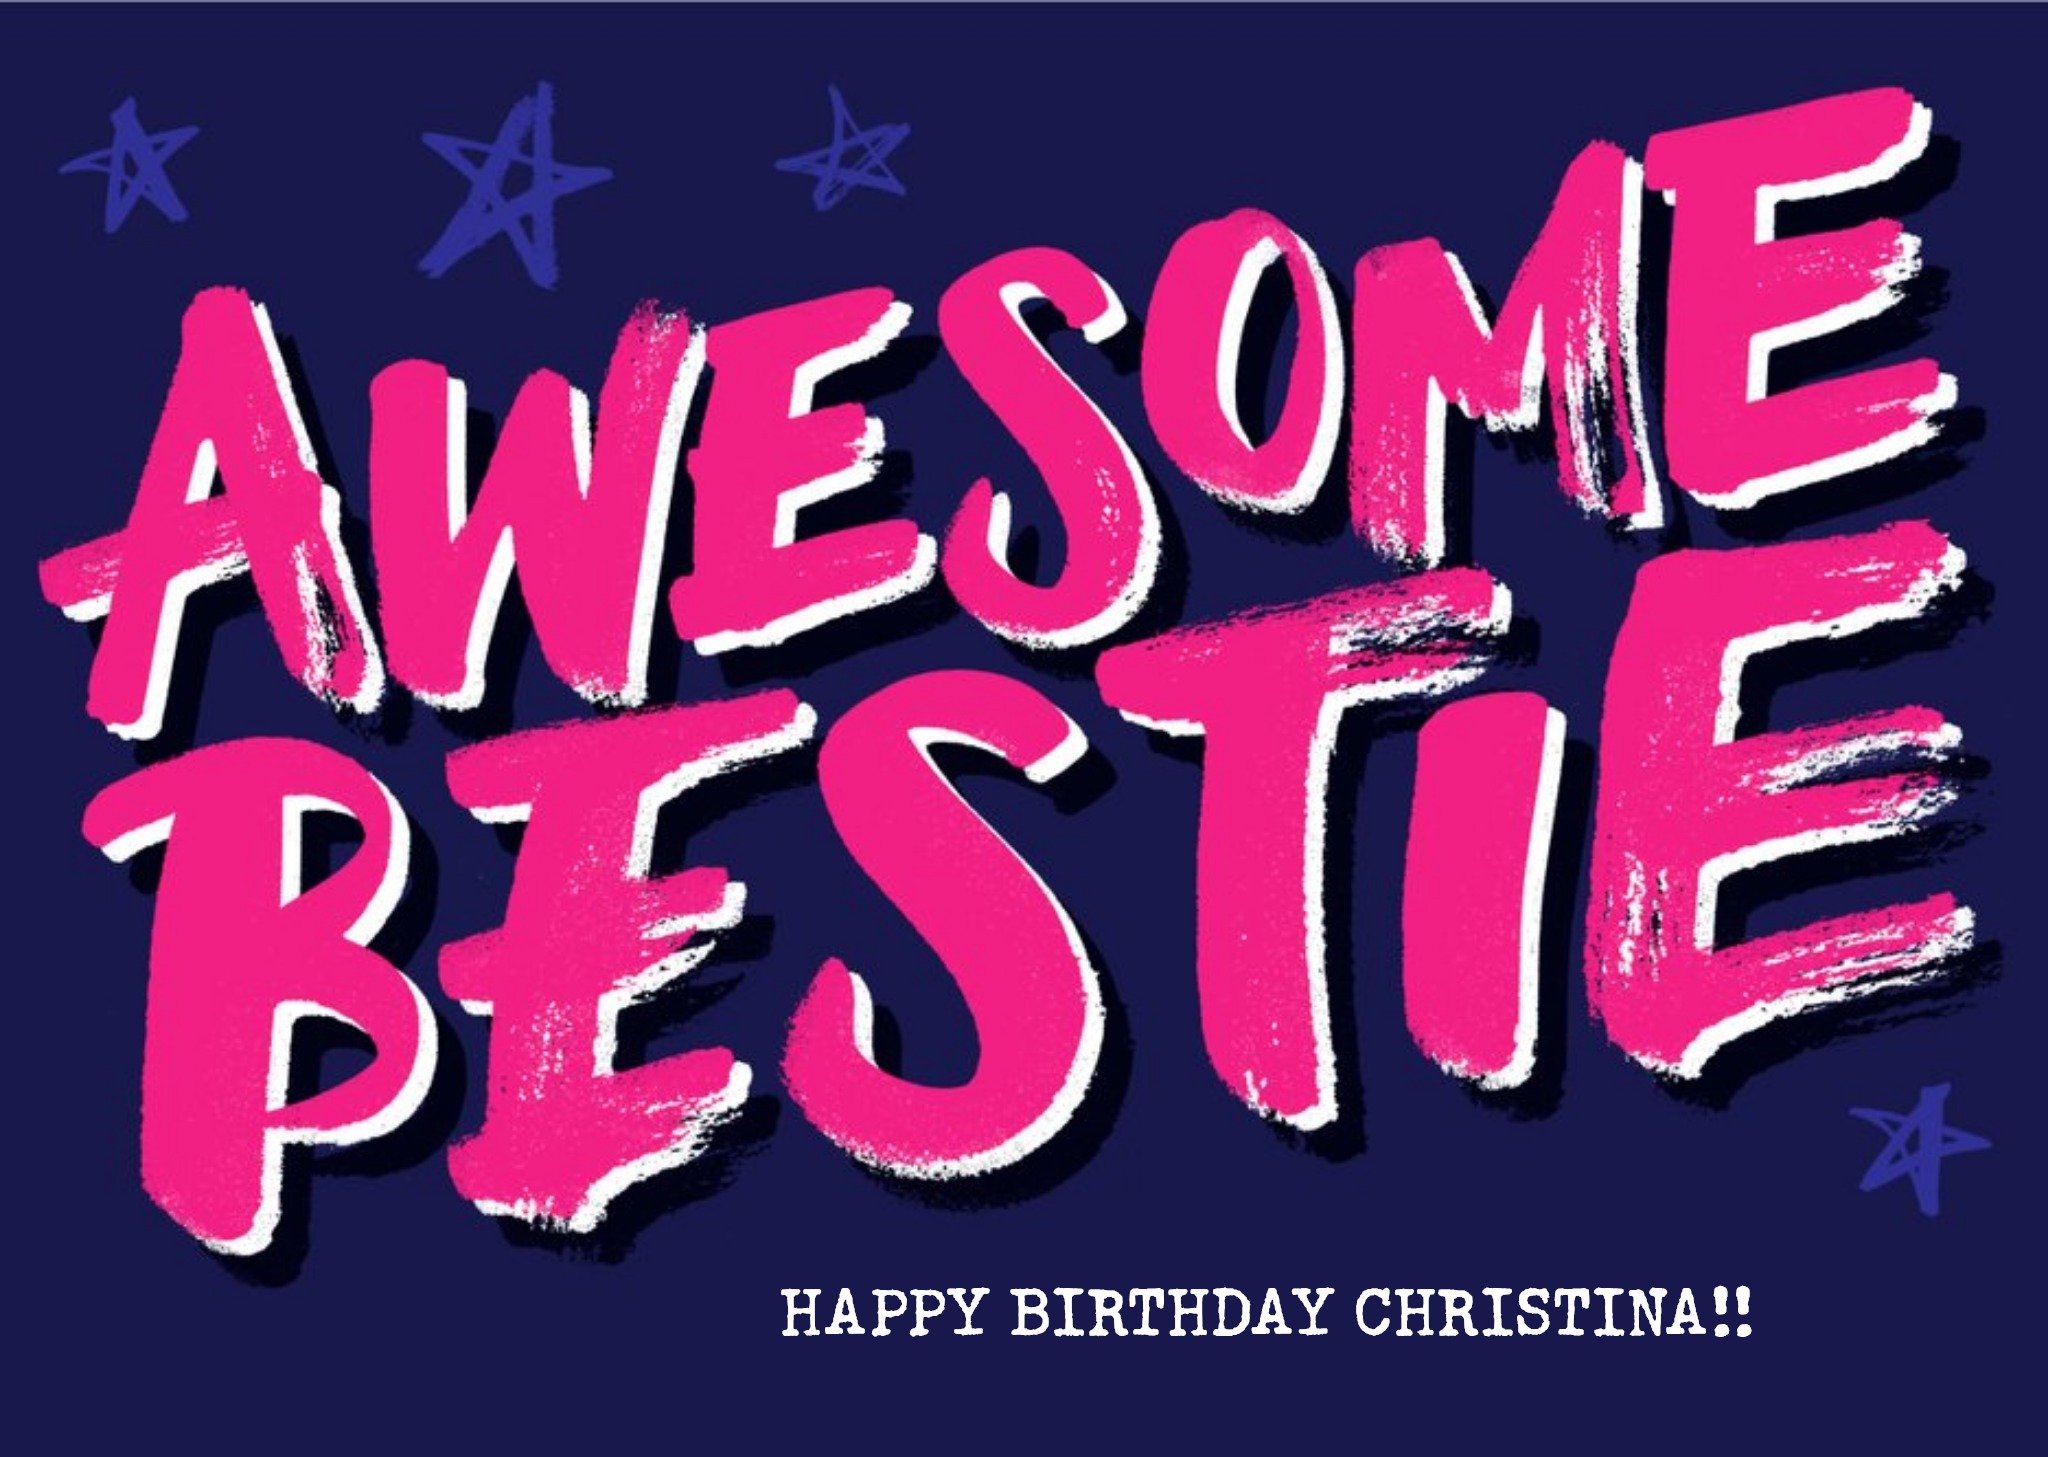 Moonpig Awesome Bestie Bright Pinktypographic Birthday Card, Large